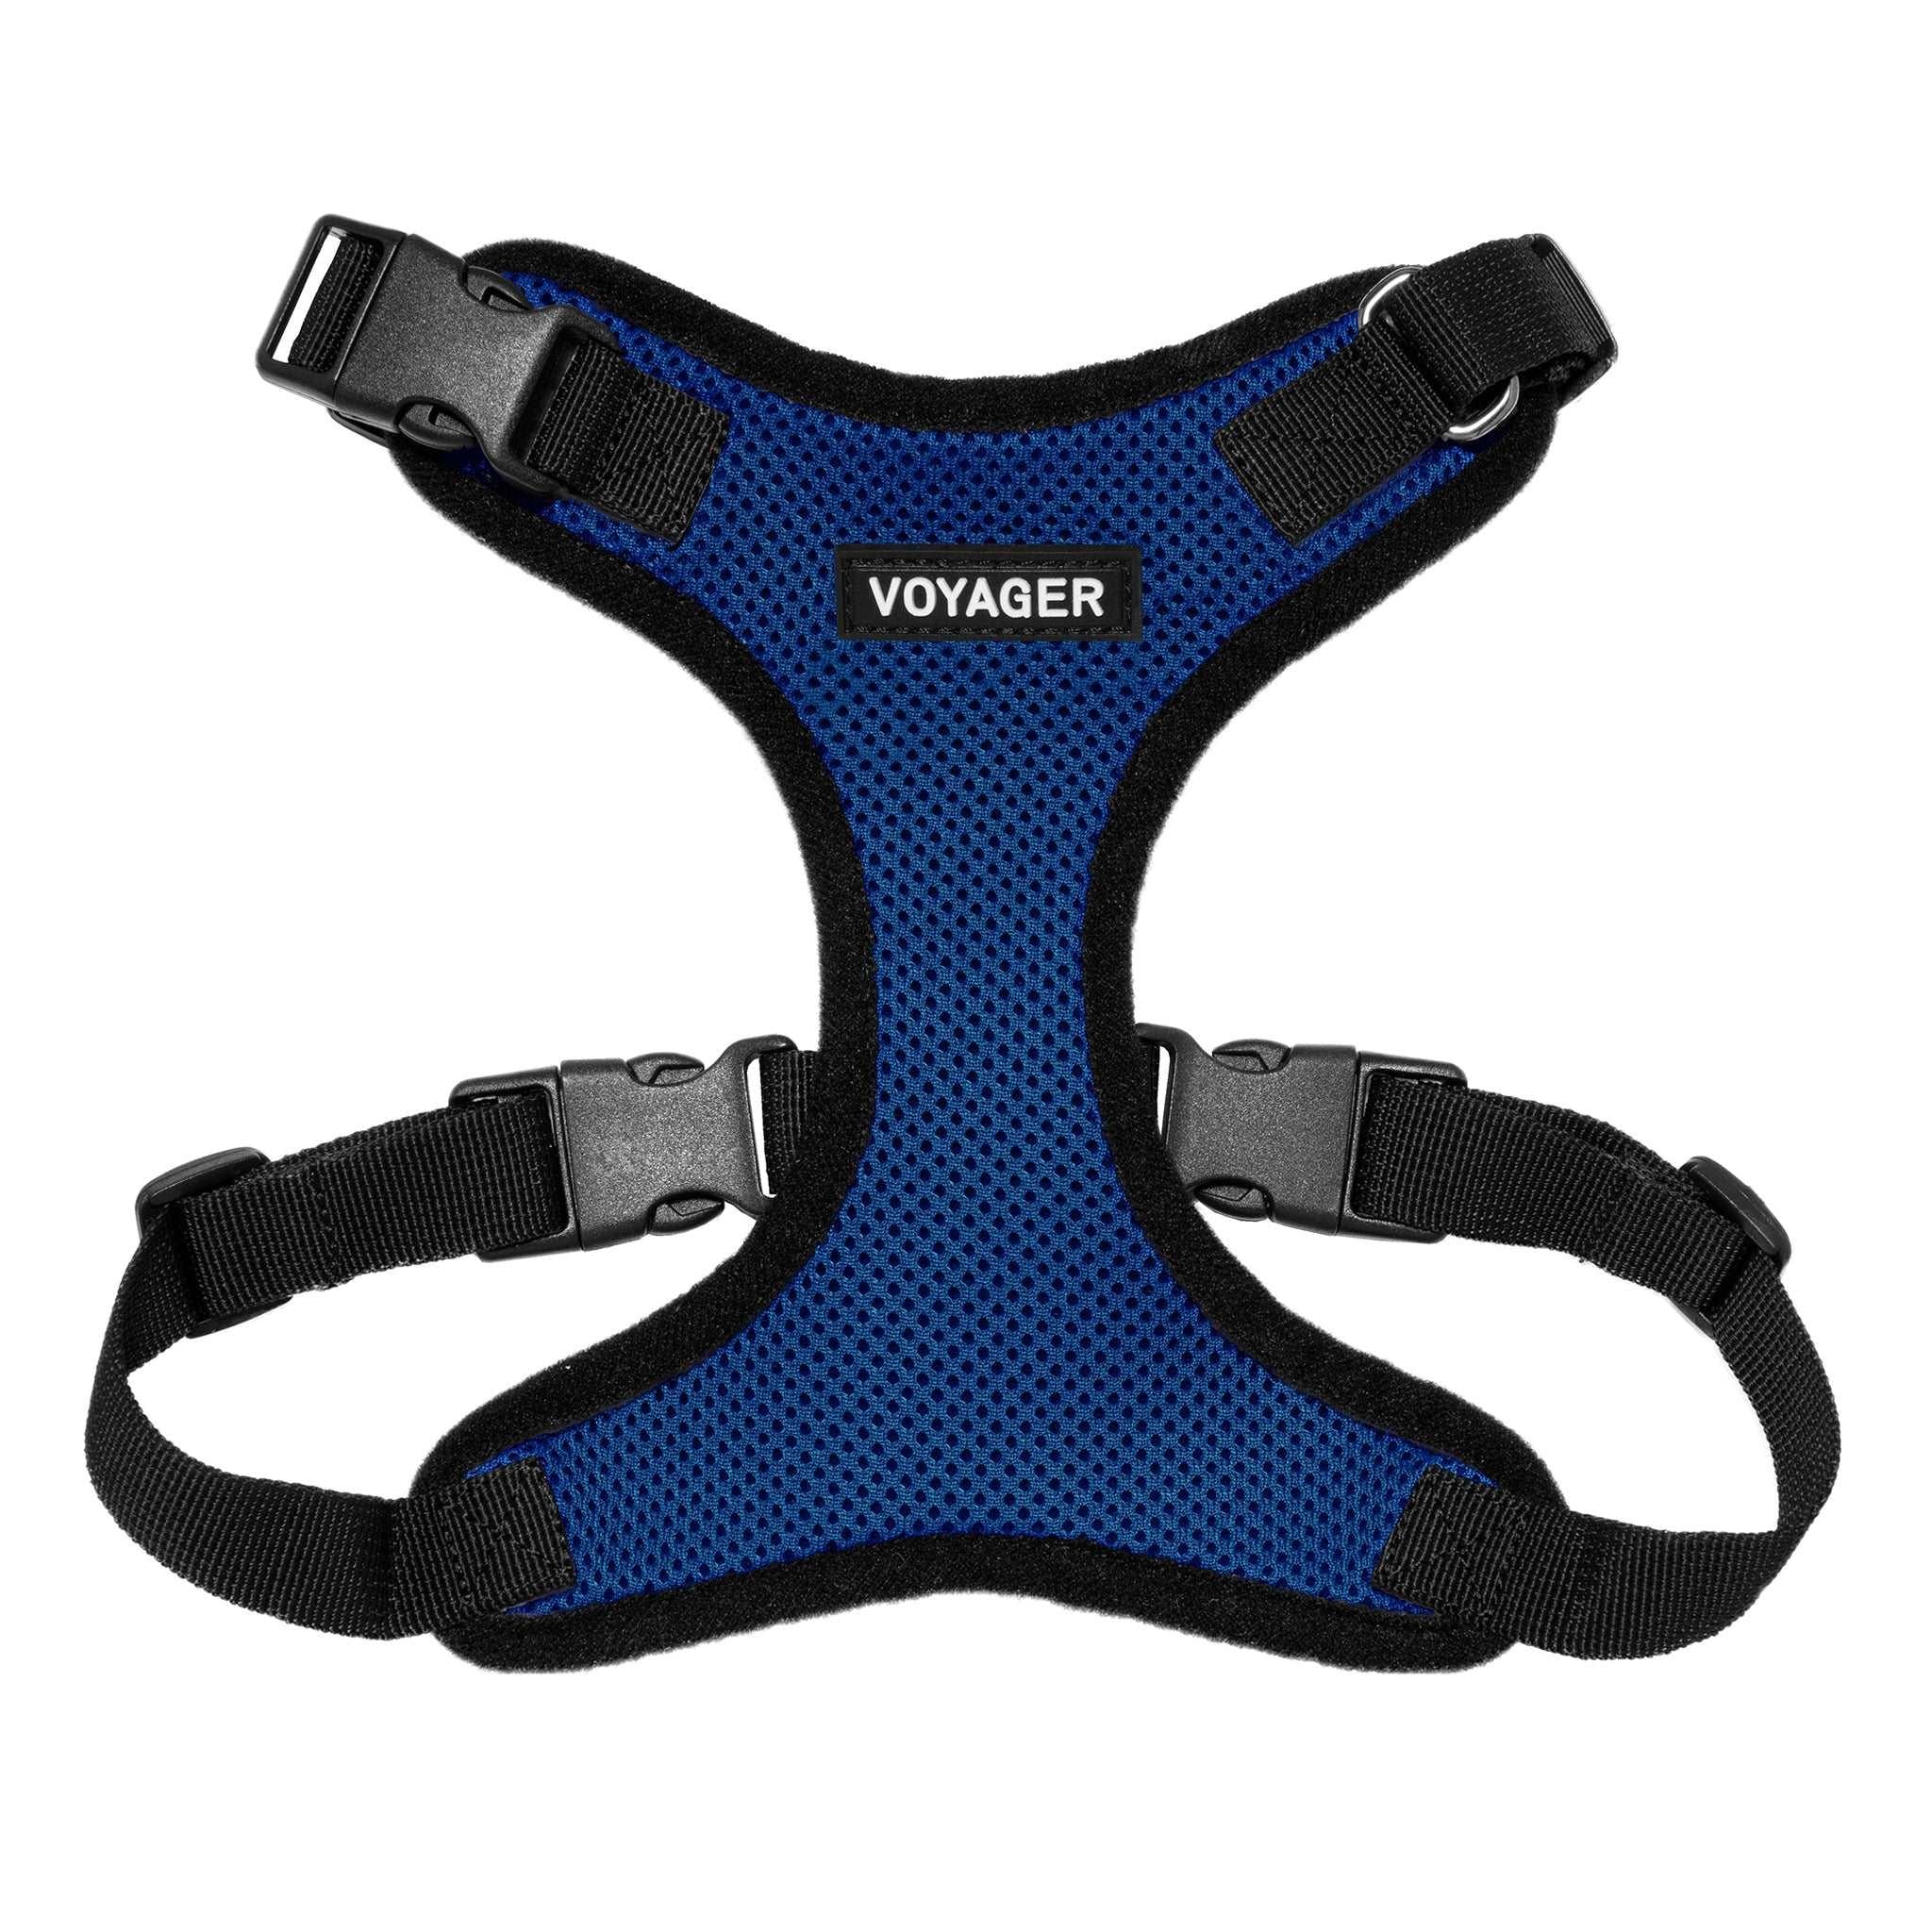 VOYAGER Step-In Lock Dog Harness in Royal Blue with Black Trim and Webbing - Front